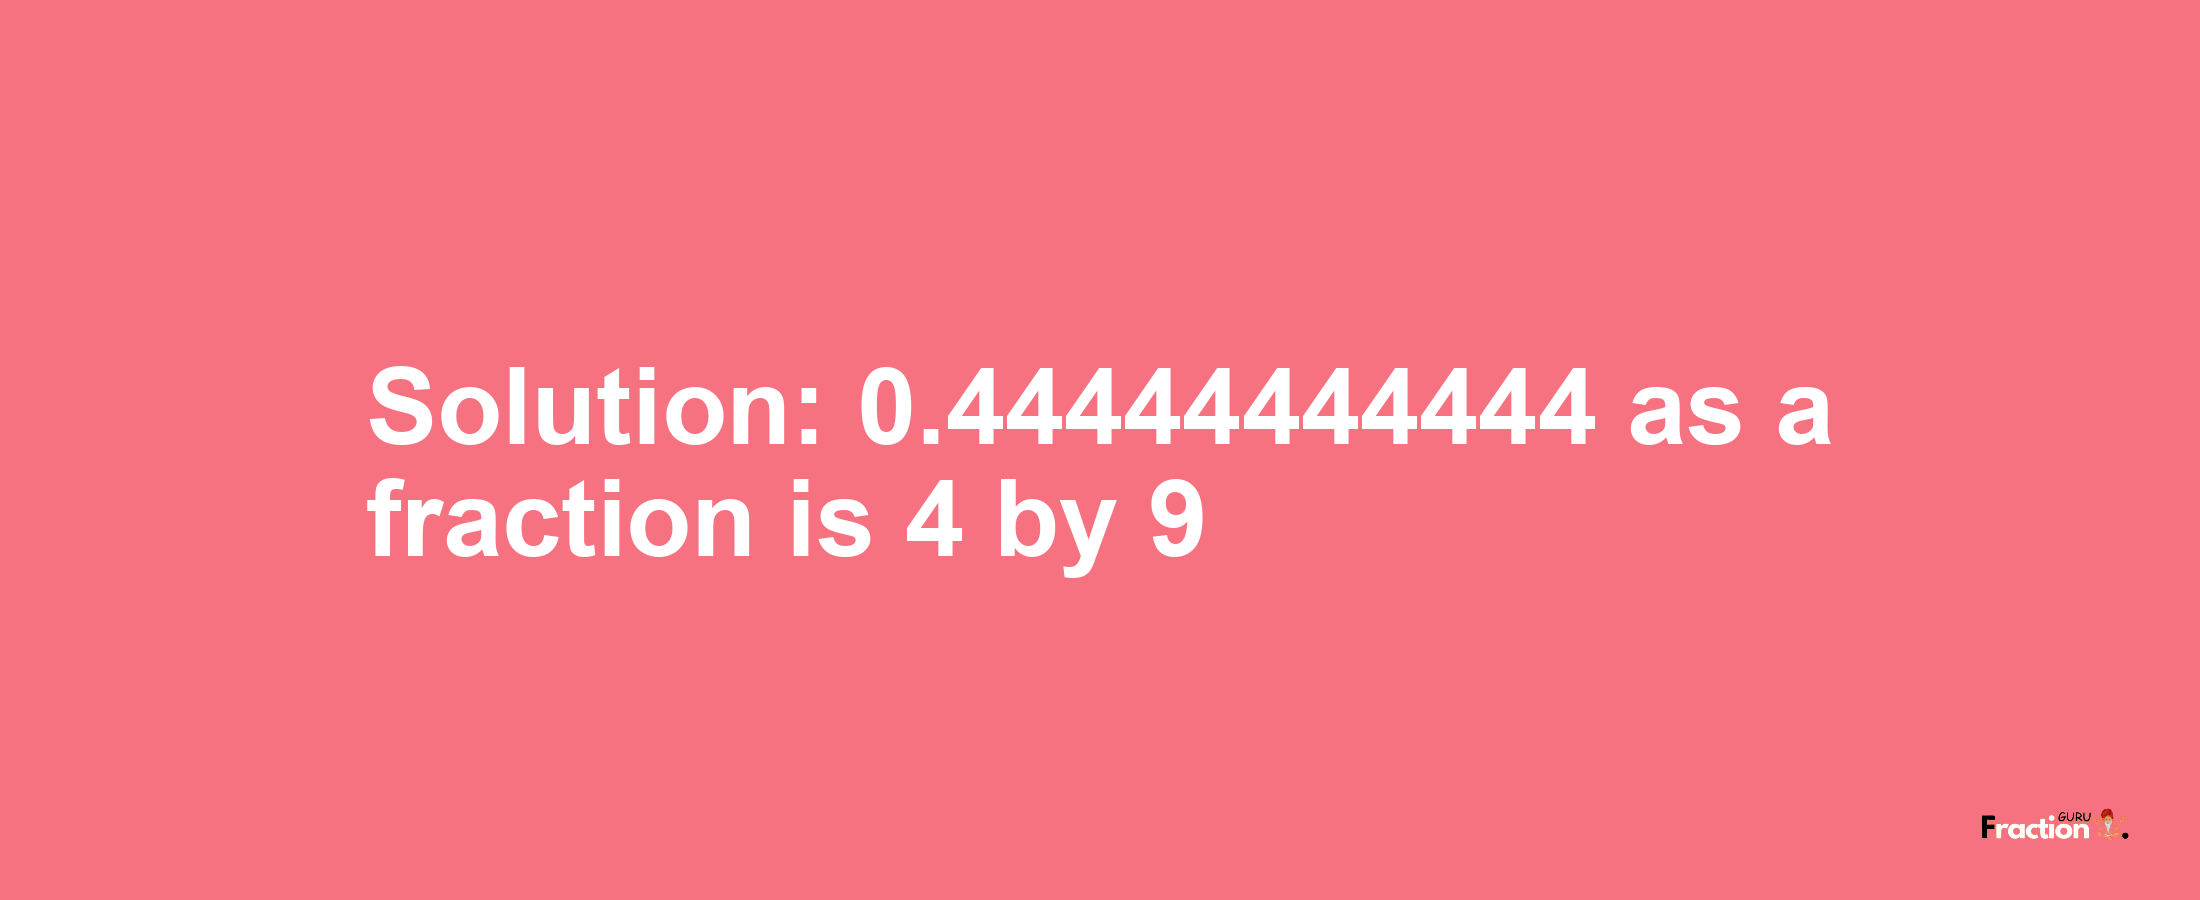 Solution:0.44444444444 as a fraction is 4/9